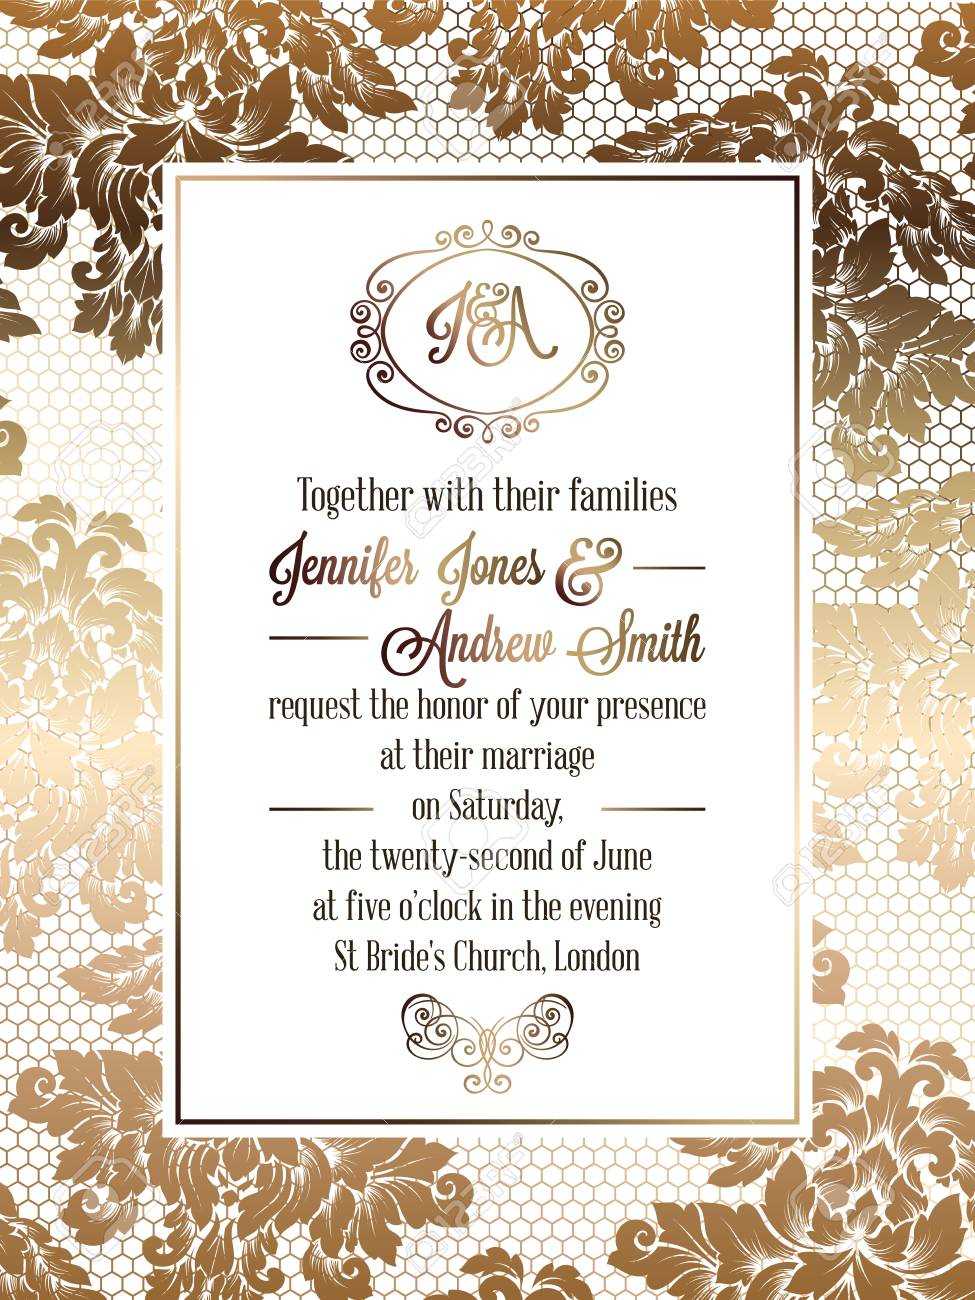 Vintage Baroque Style Wedding Invitation Card Template.. Elegant.. Throughout Invitation Cards Templates For Marriage